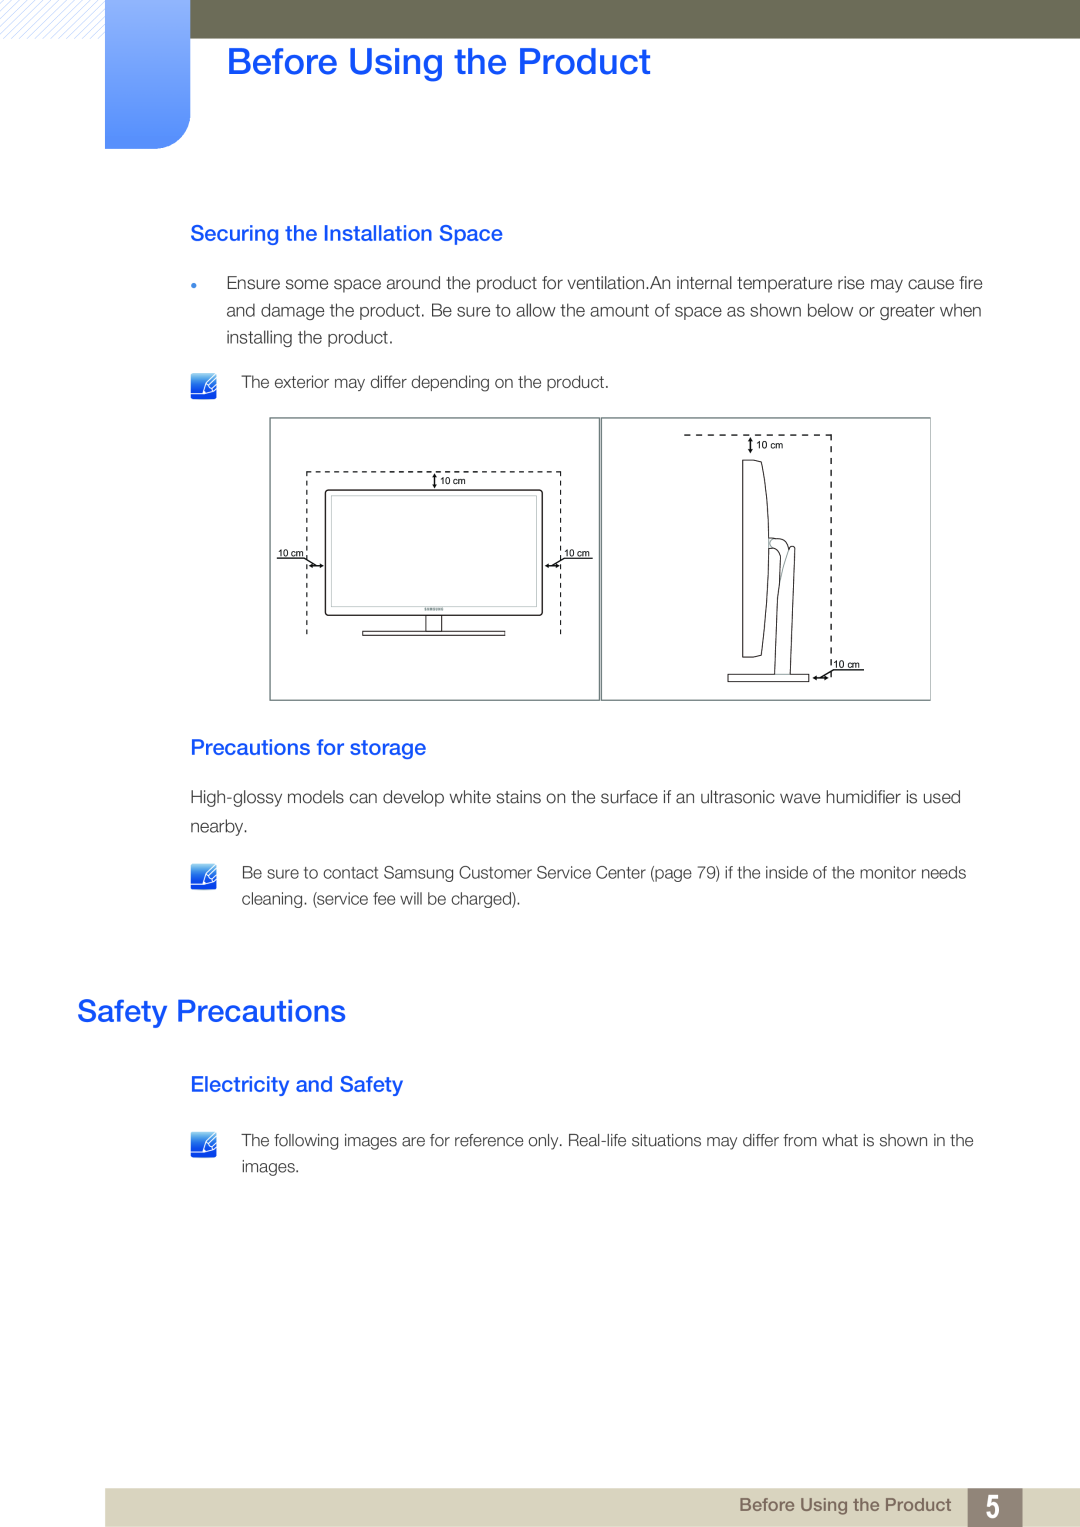 Samsung S23A750D Safety Precautions, Securing the Installation Space, Precautions for storage, Electricity and Safety 